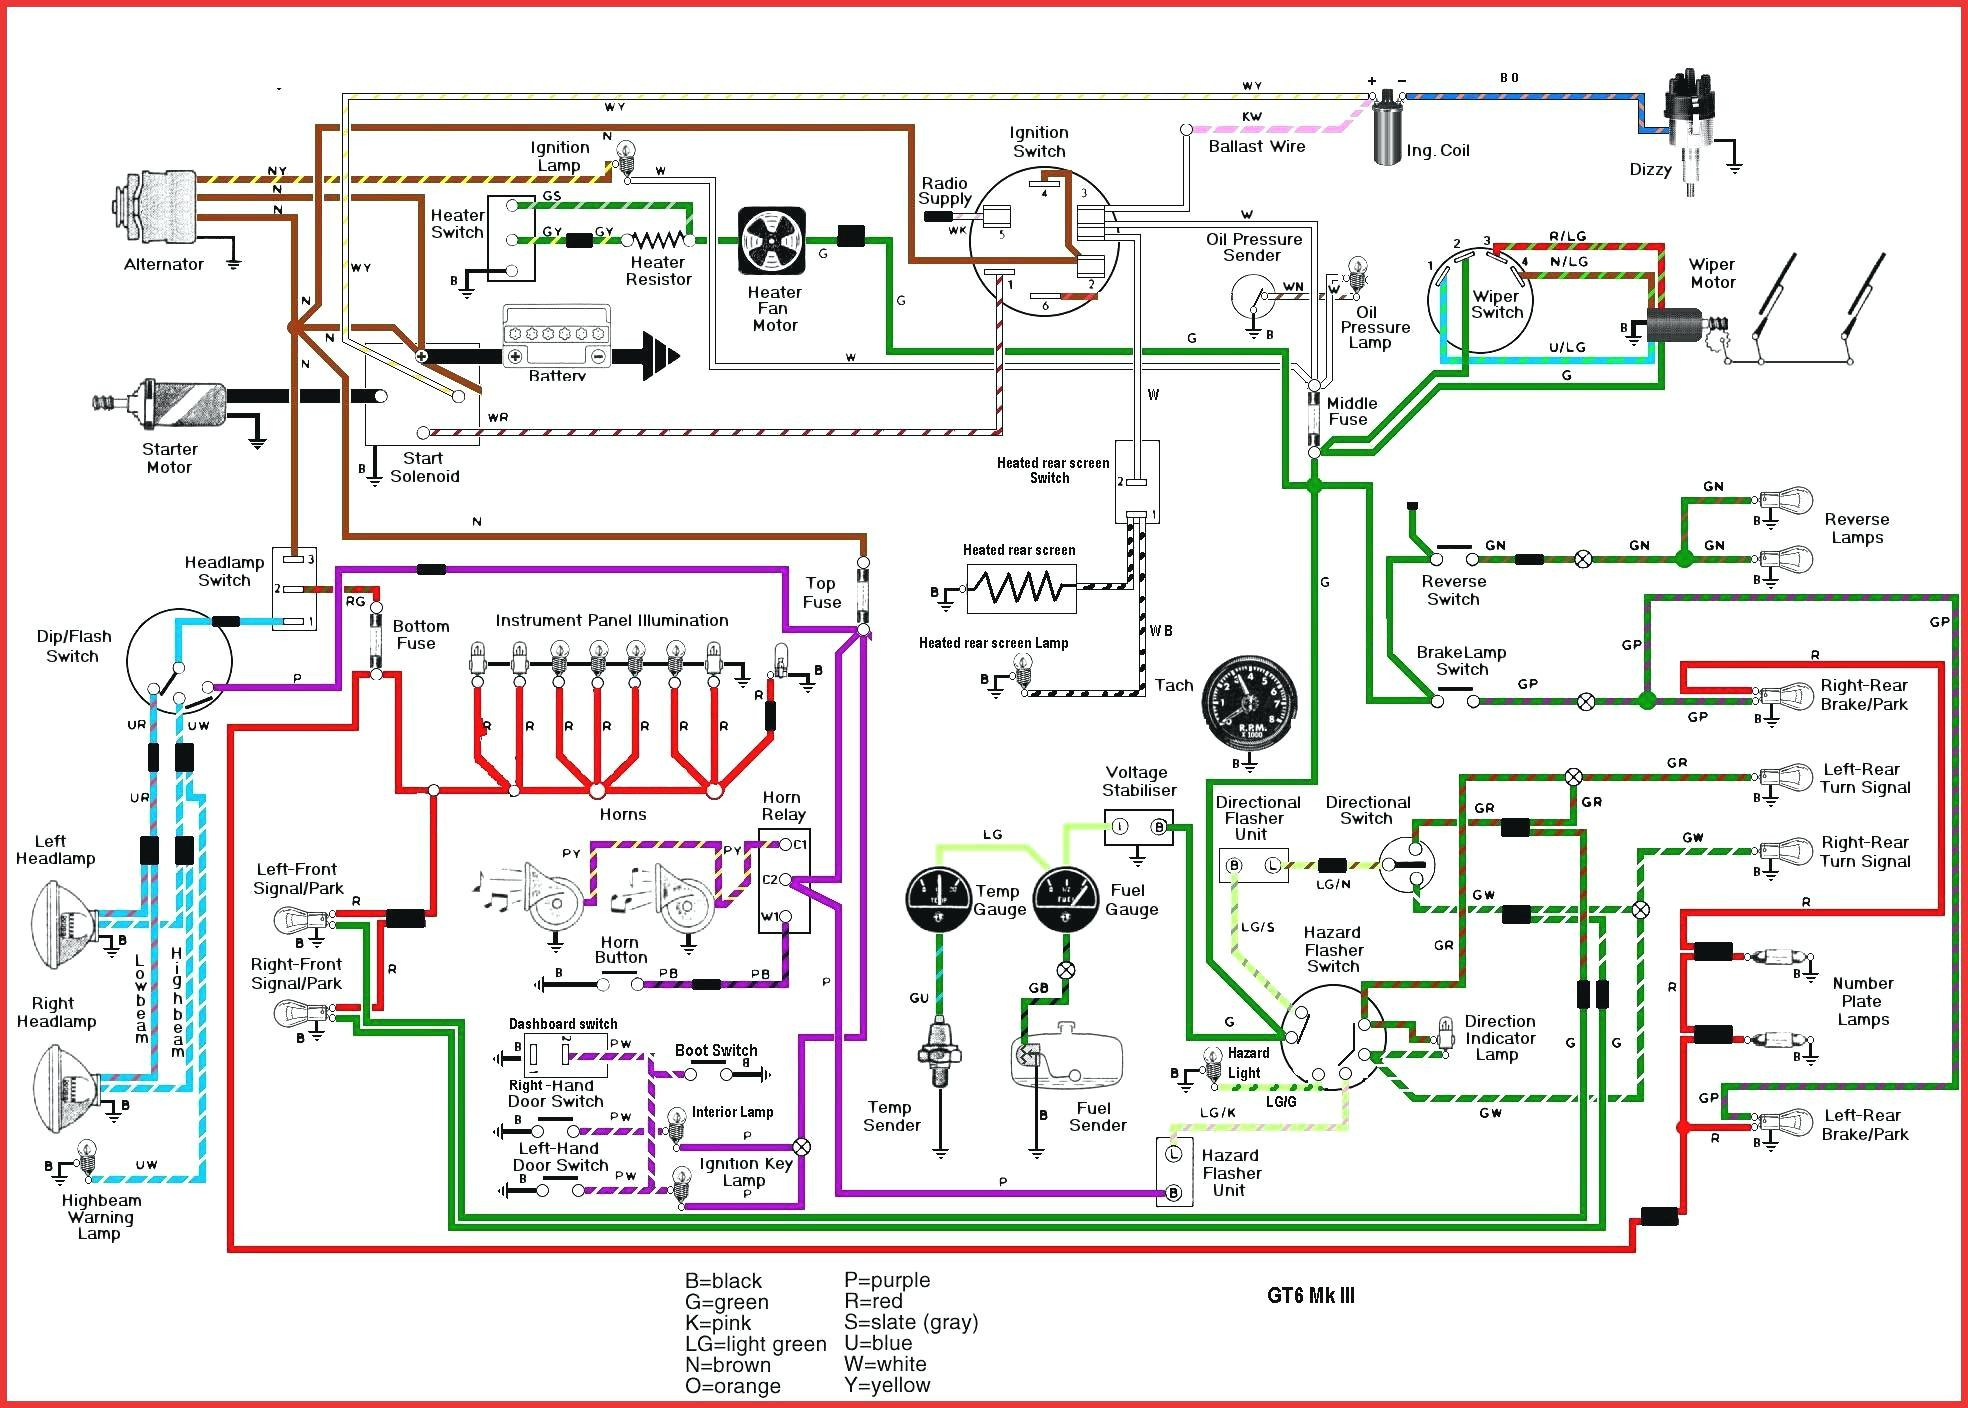 House Wiring Diagram With Inverter Example Of Single Phase Wiring - Single Phase House Wiring Diagram